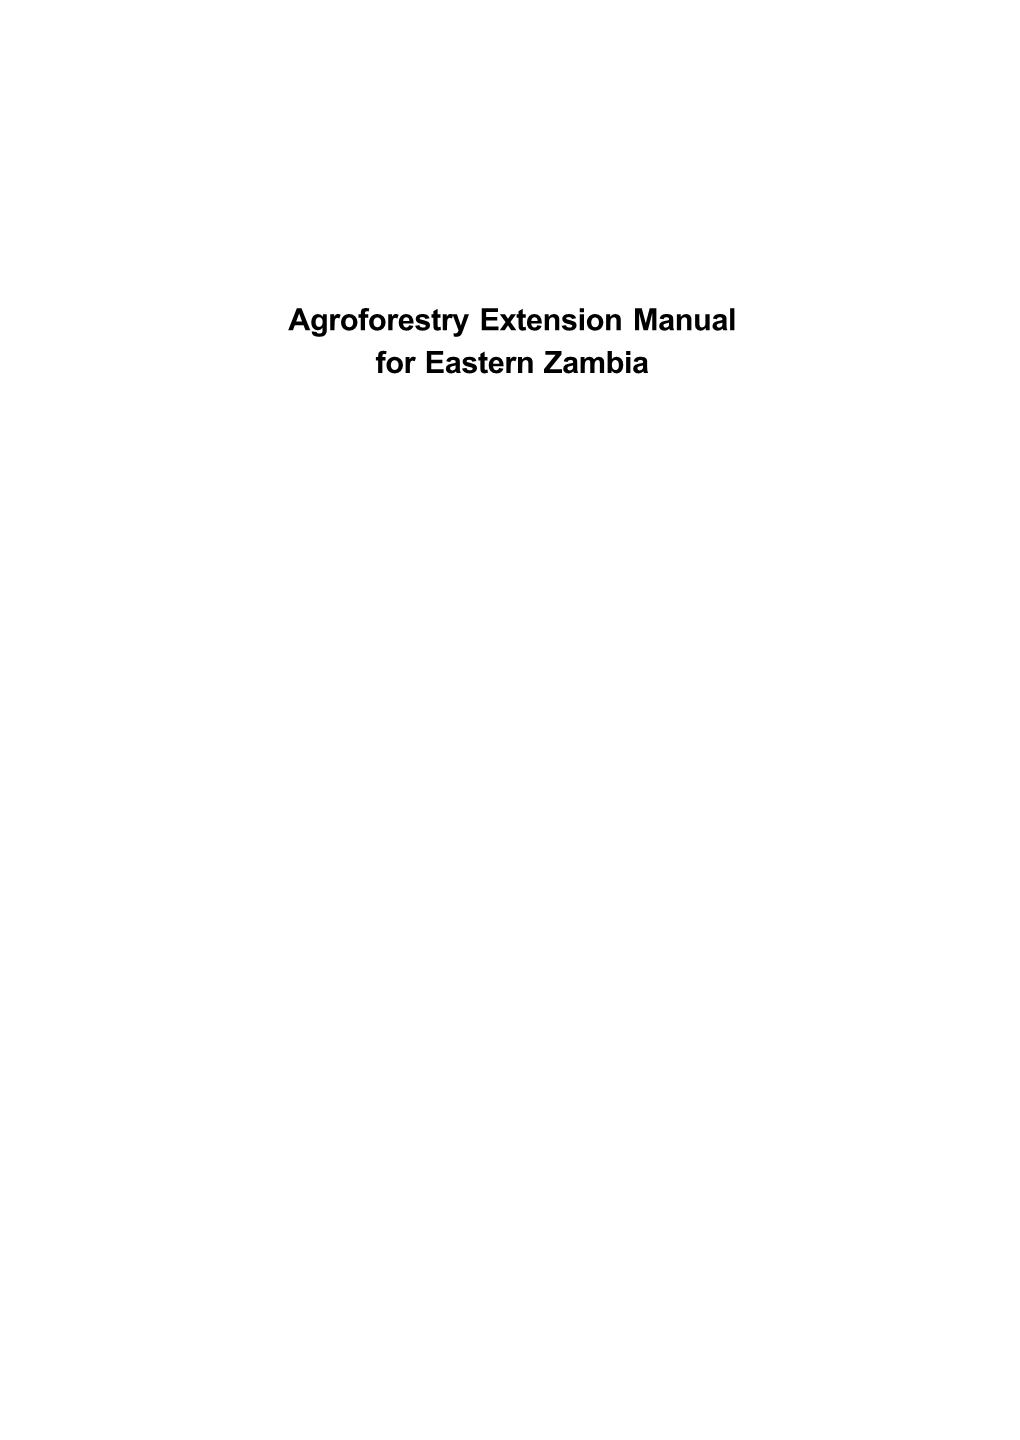 Agroforestry Extension Manual for Eastern Zambia